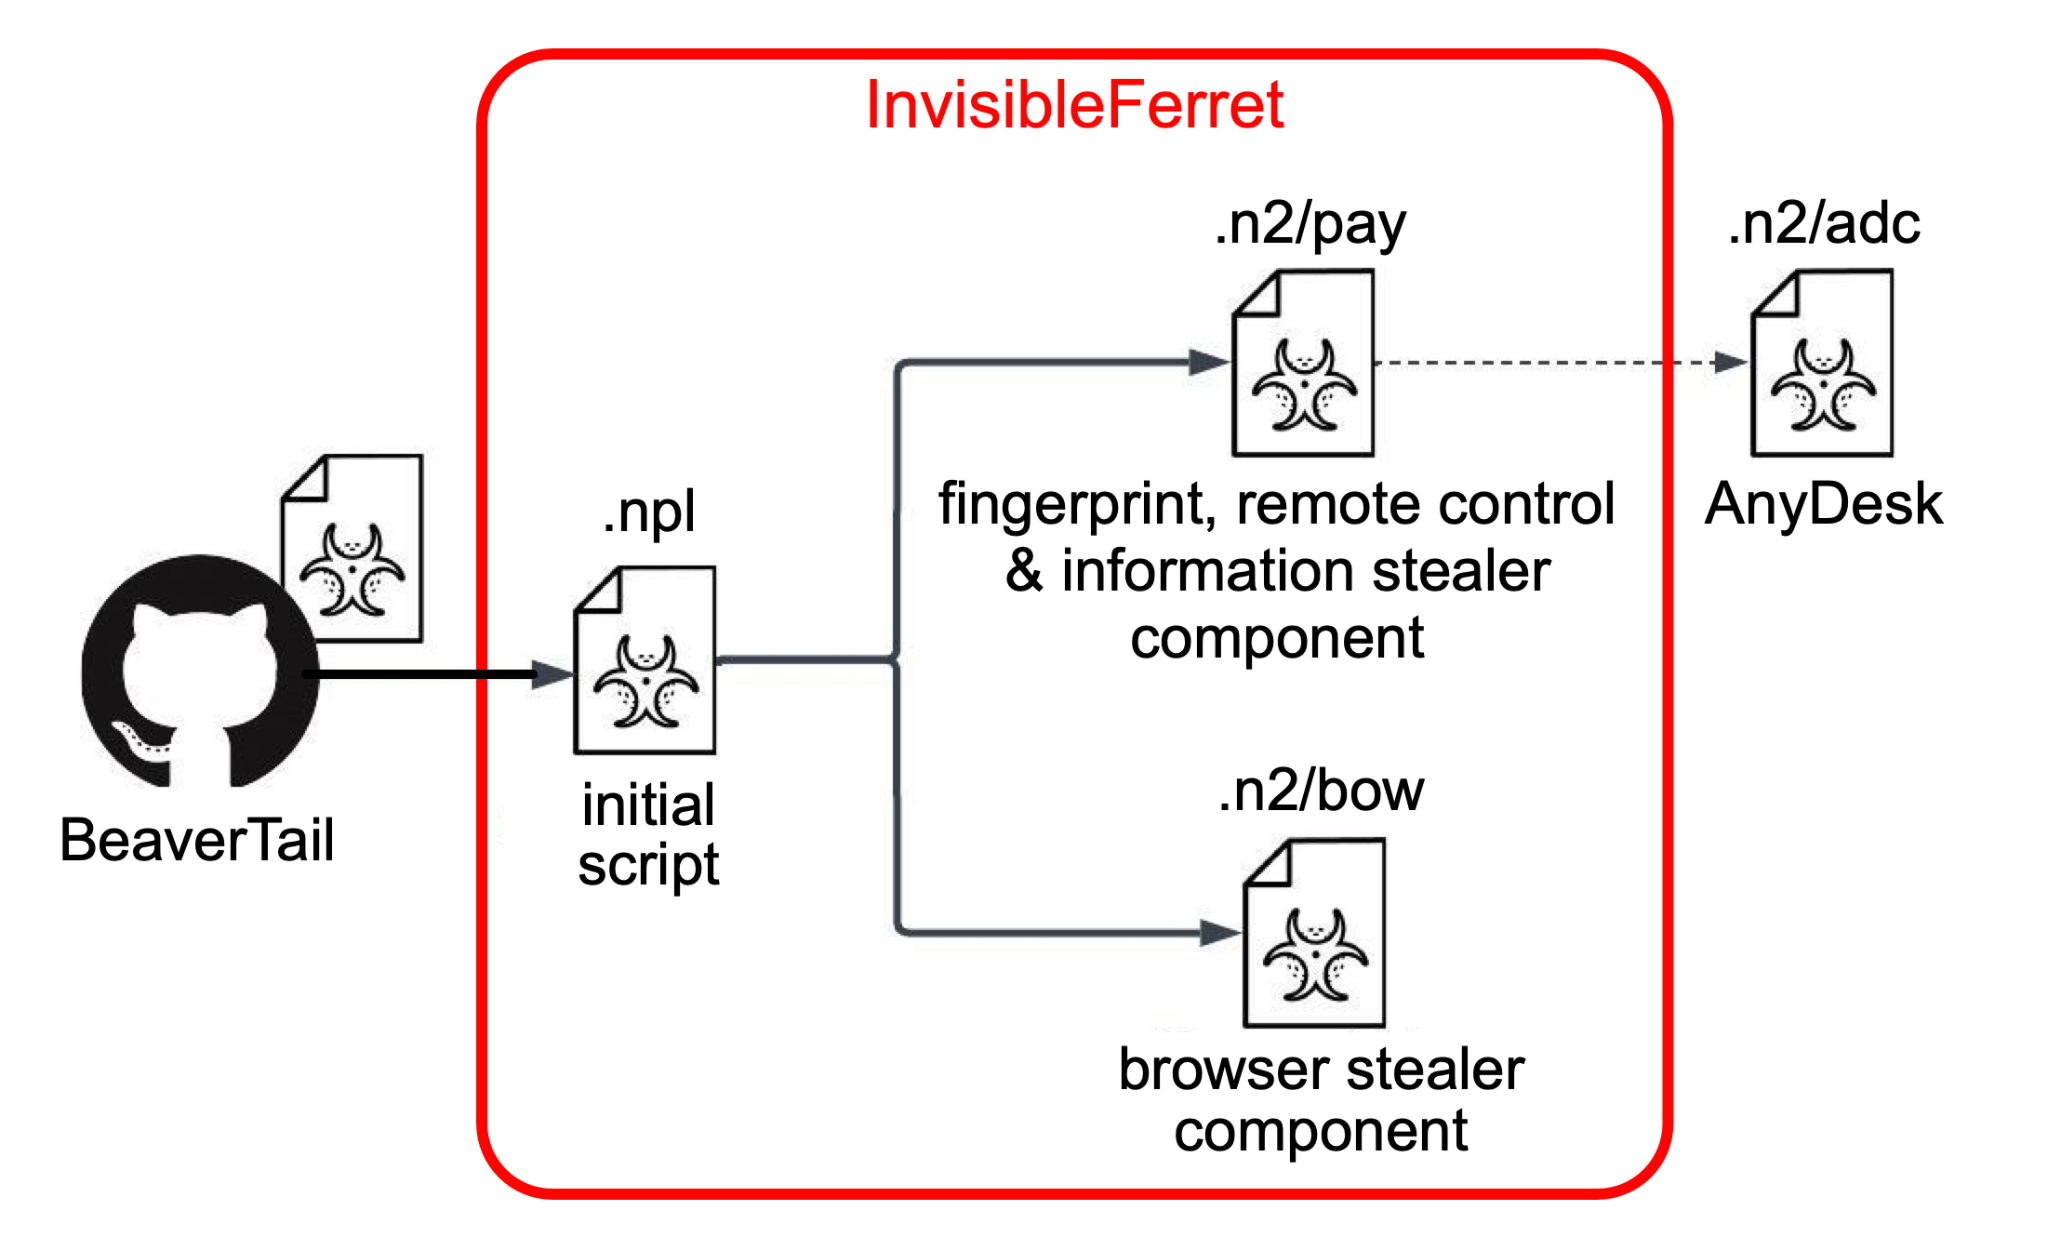 Image 5 is a diagram of how InvisibleFerret works. From the BeaverTail GitHub the .npl initial script branches into two: one is the .n2/pay with the fingerprint, remote control and information-stealer component. This branch ends with .n2/adc, AnyDesk. The second branch is .n2/bow, or the browser-stealer component. 